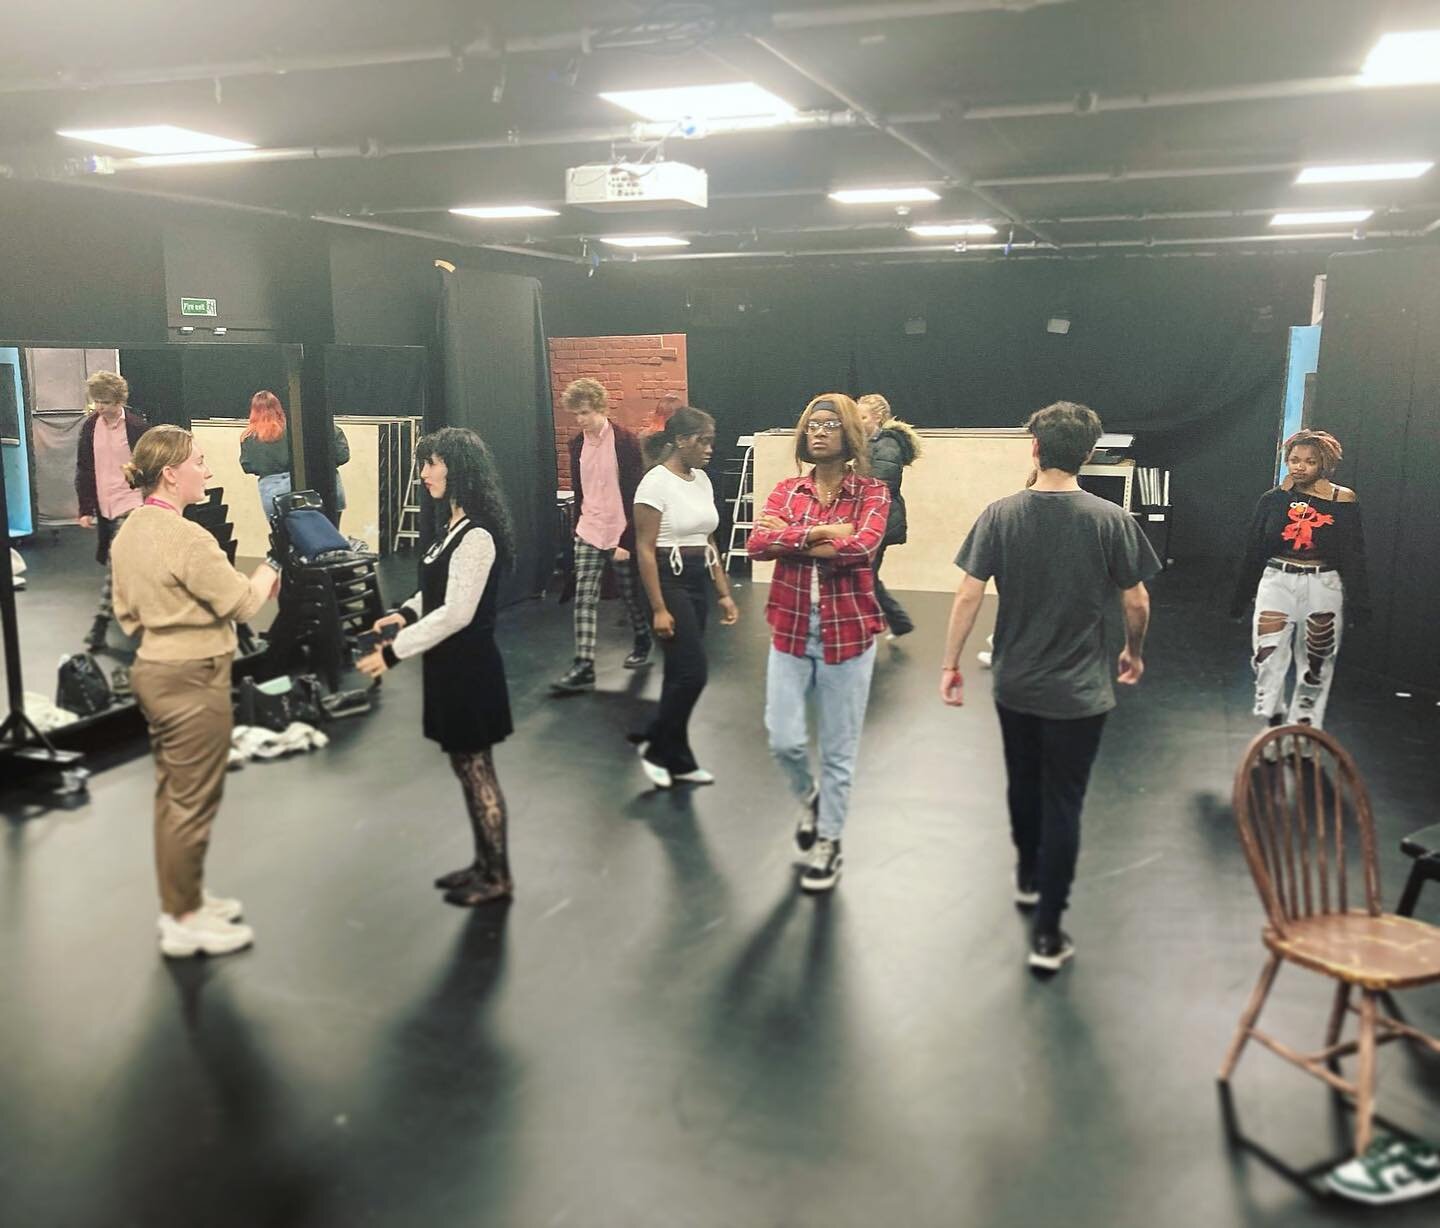 Voice exploration and development with @mollyp_voicecoach. 🎭

#londoncollegeofperformingarts #act #actors #training #theatre #performers #londoncollegepa #voicecoaching